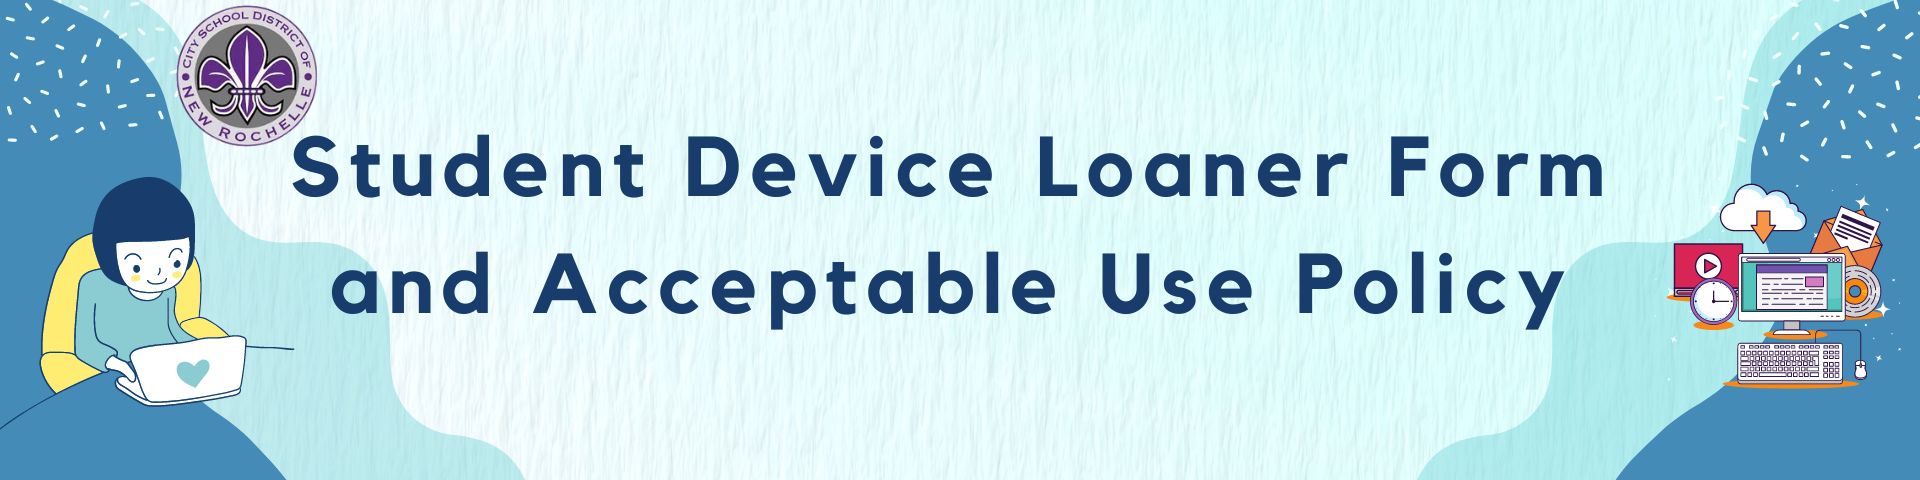 Device Loaner Form - AUP